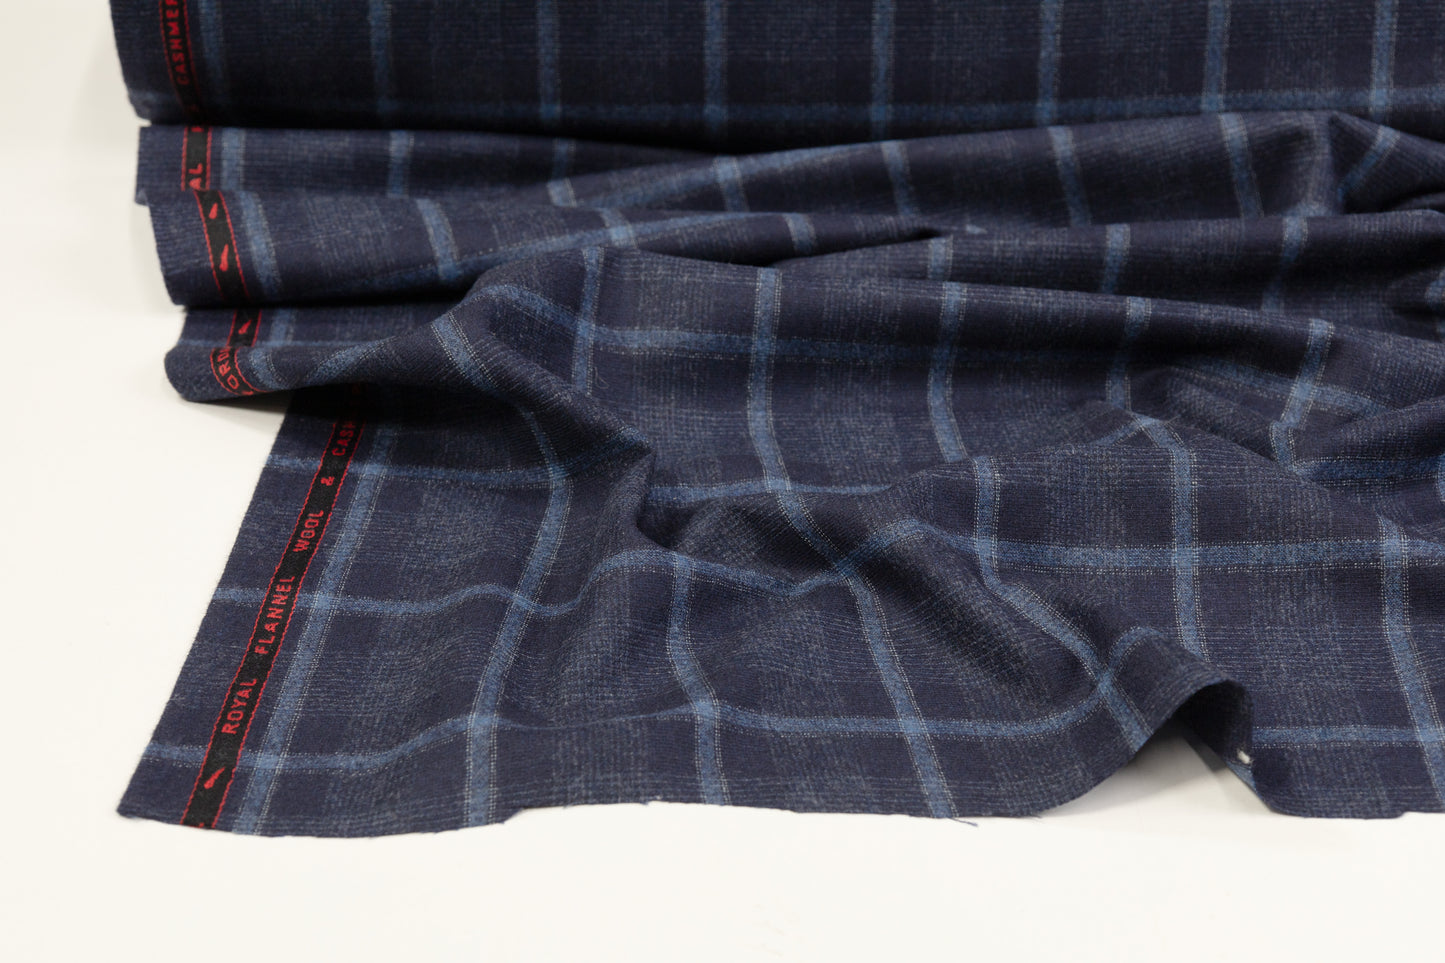 Fordam - Royal Flannel Wool and Cashmere Suiting - Navy Blue